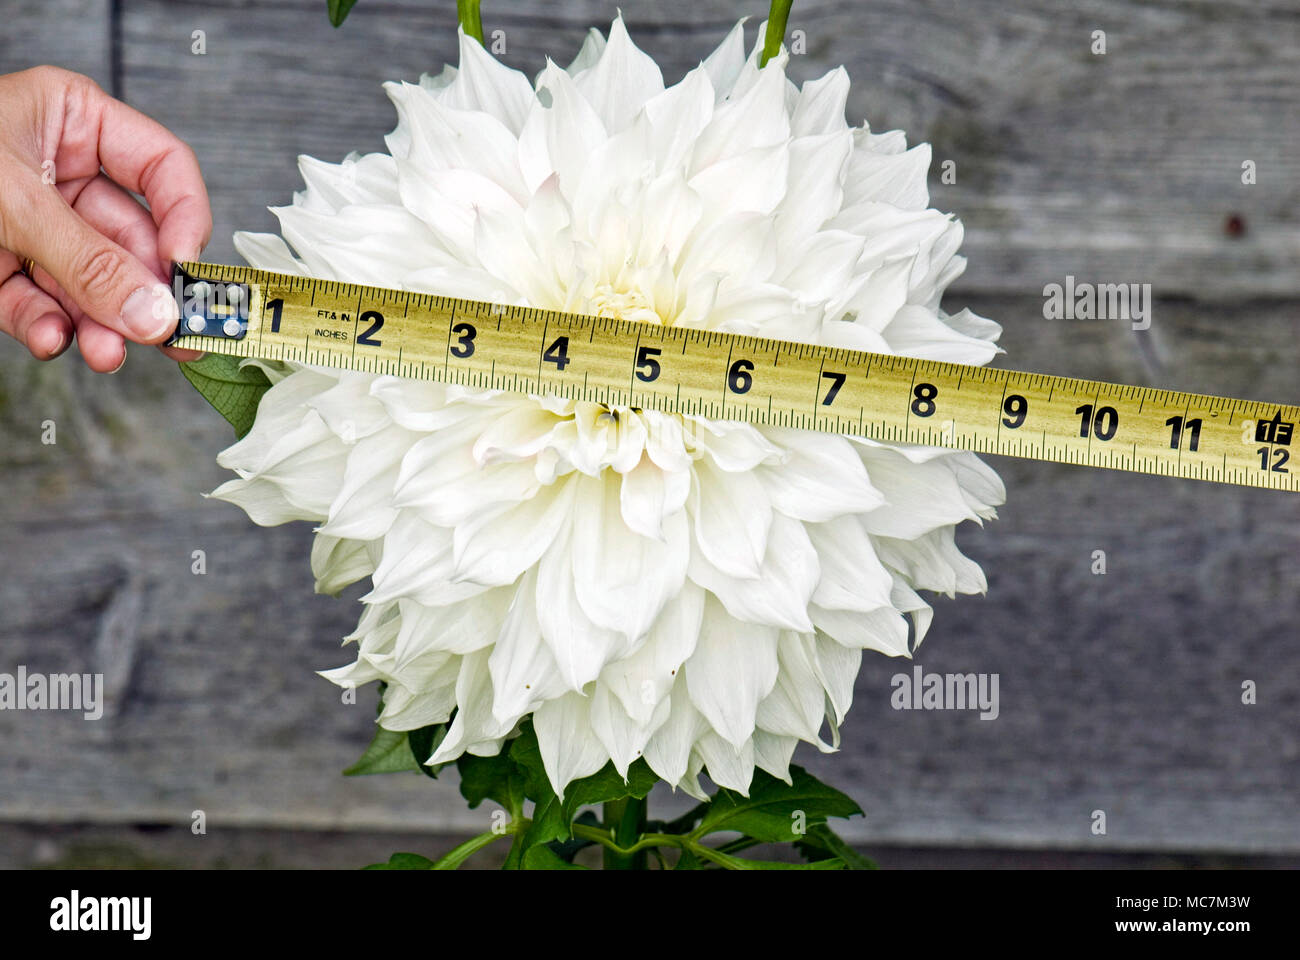 tape measure stretched over large white dahlia flower Stock Photo